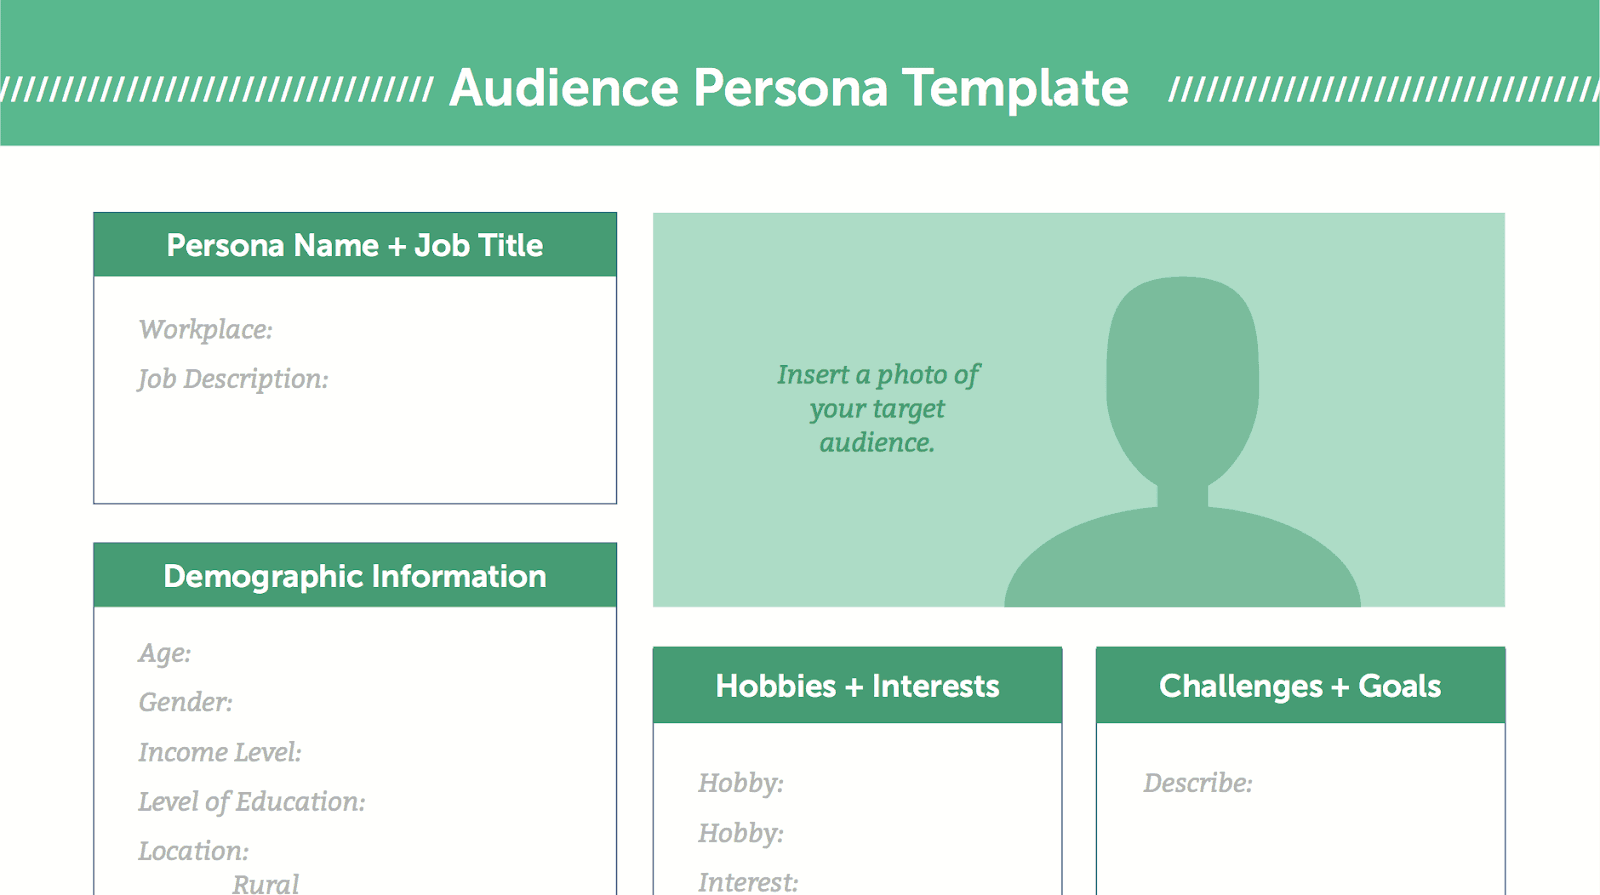 Audience persona template